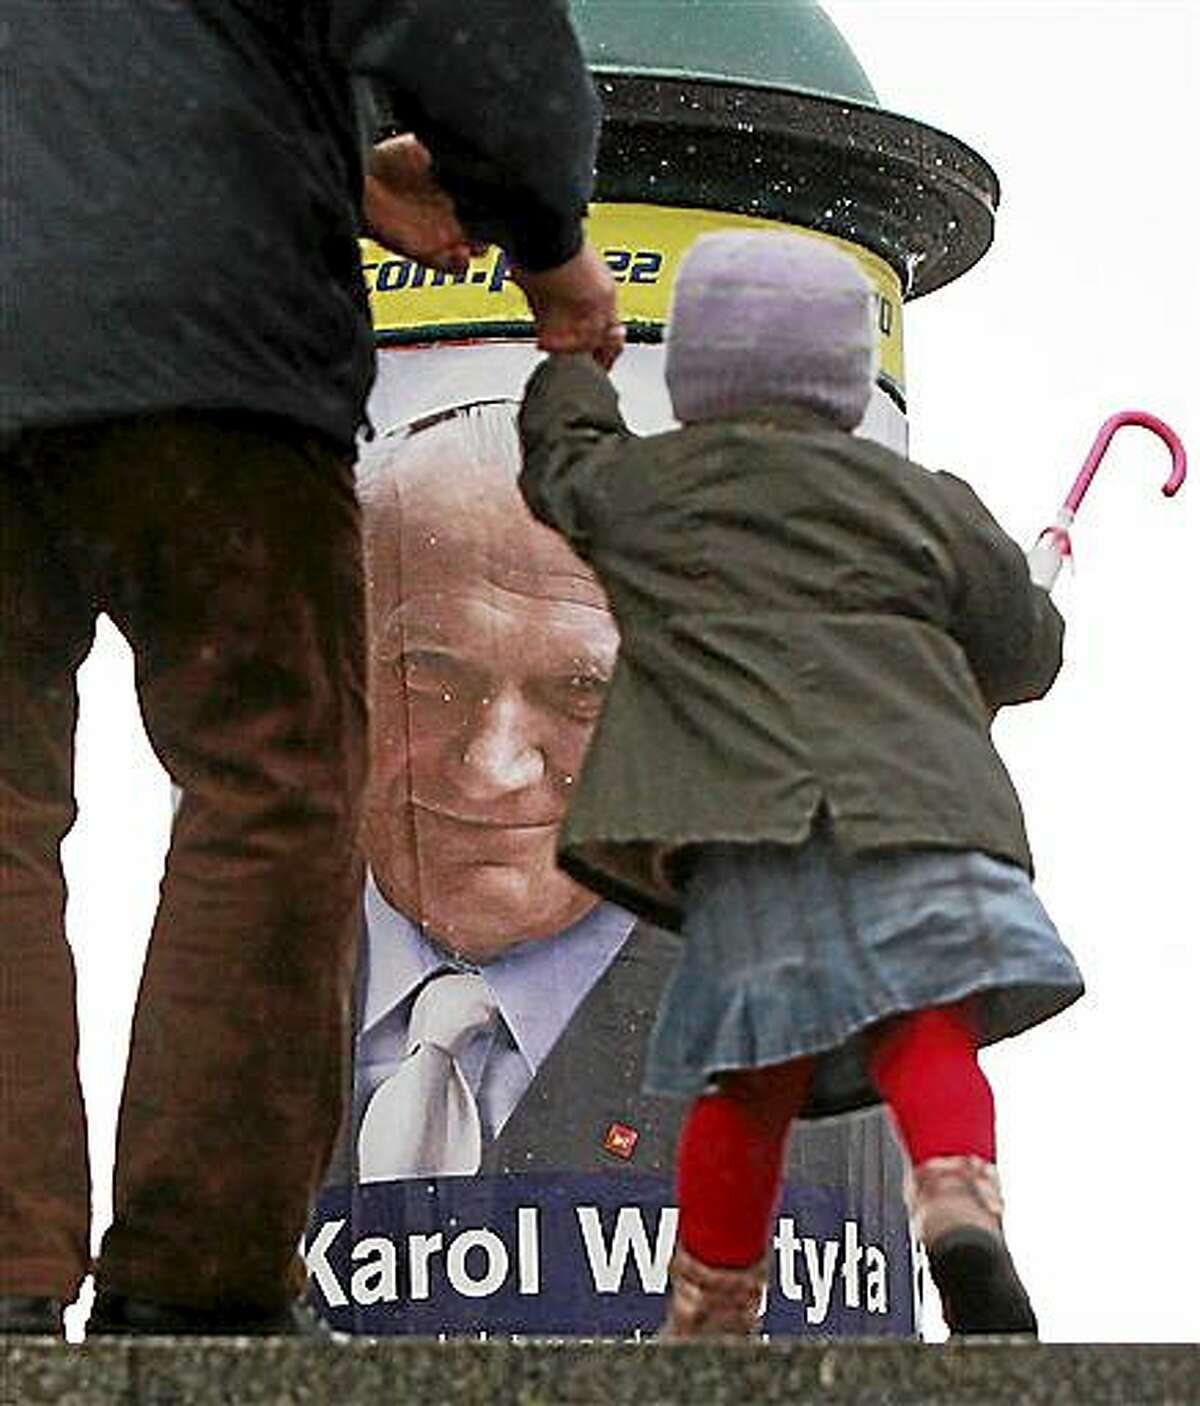 A pedestrian leads a child by a poster in Warsaw marking 10 years since the death of Polish-born Pope John Paul II. The poster encourages people to make their daily decisions in accordance with his teachings. John Paul will be gone a decade on Thursday. To attract attention to the poster, the pope, born as Karol Wojtyla, appears as a lay candidate in Poland’s May 10 presidential elections.